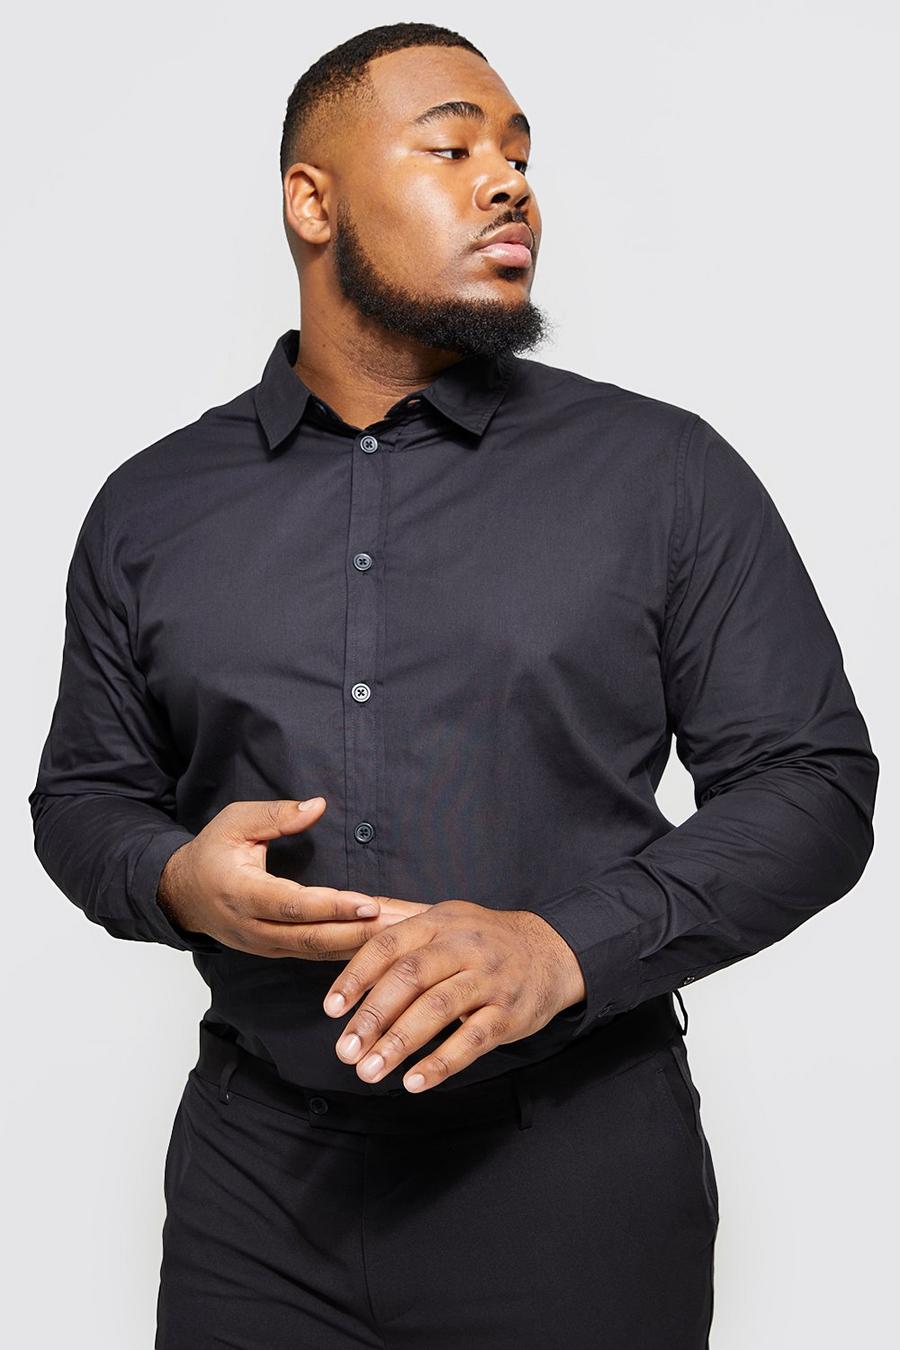 Men's Plus Size Out | boohoo UK